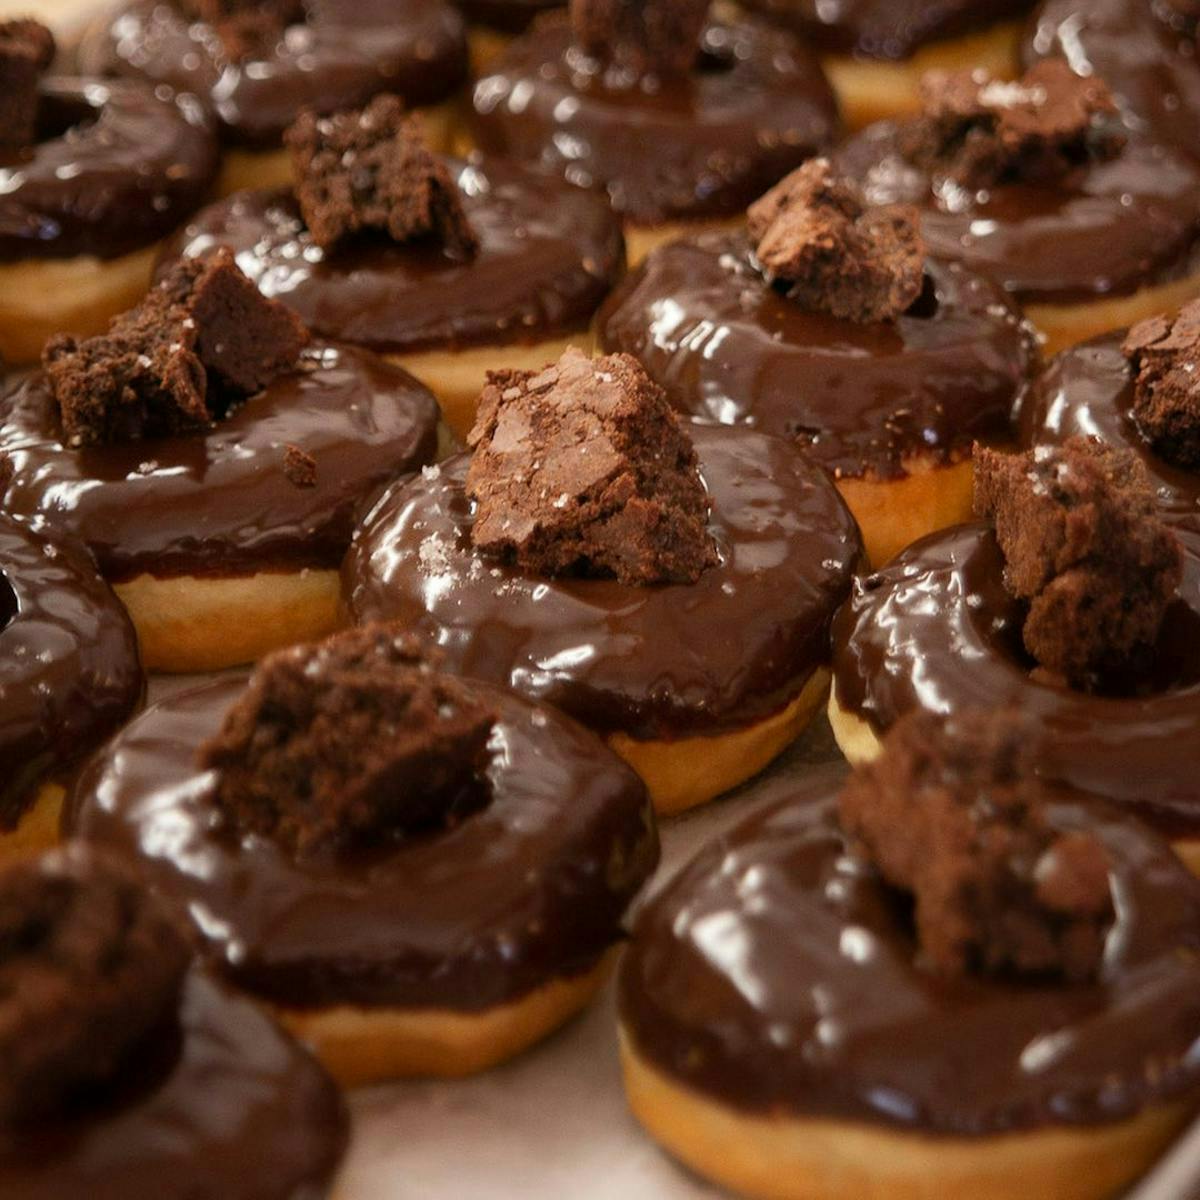 A table full of chocolate glazed doghnuts